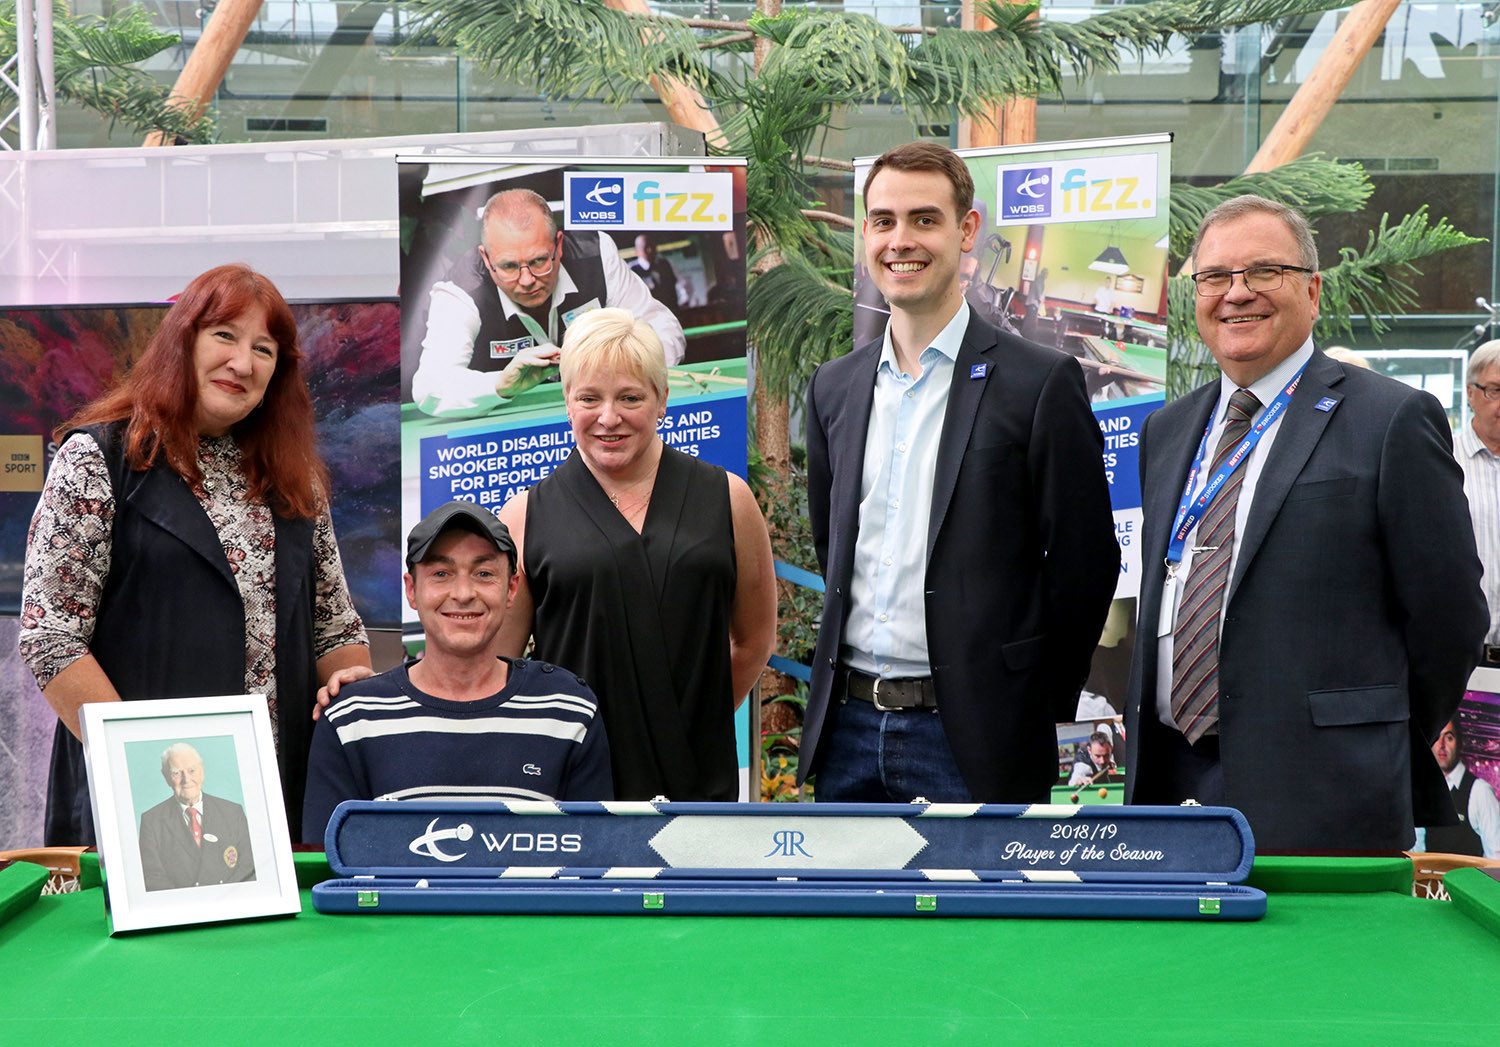 The winner of the WDBS Vic Hartley Player of the Season Award for 2019-2020 is set to be announced on Disability Snooker Day ©WDBS